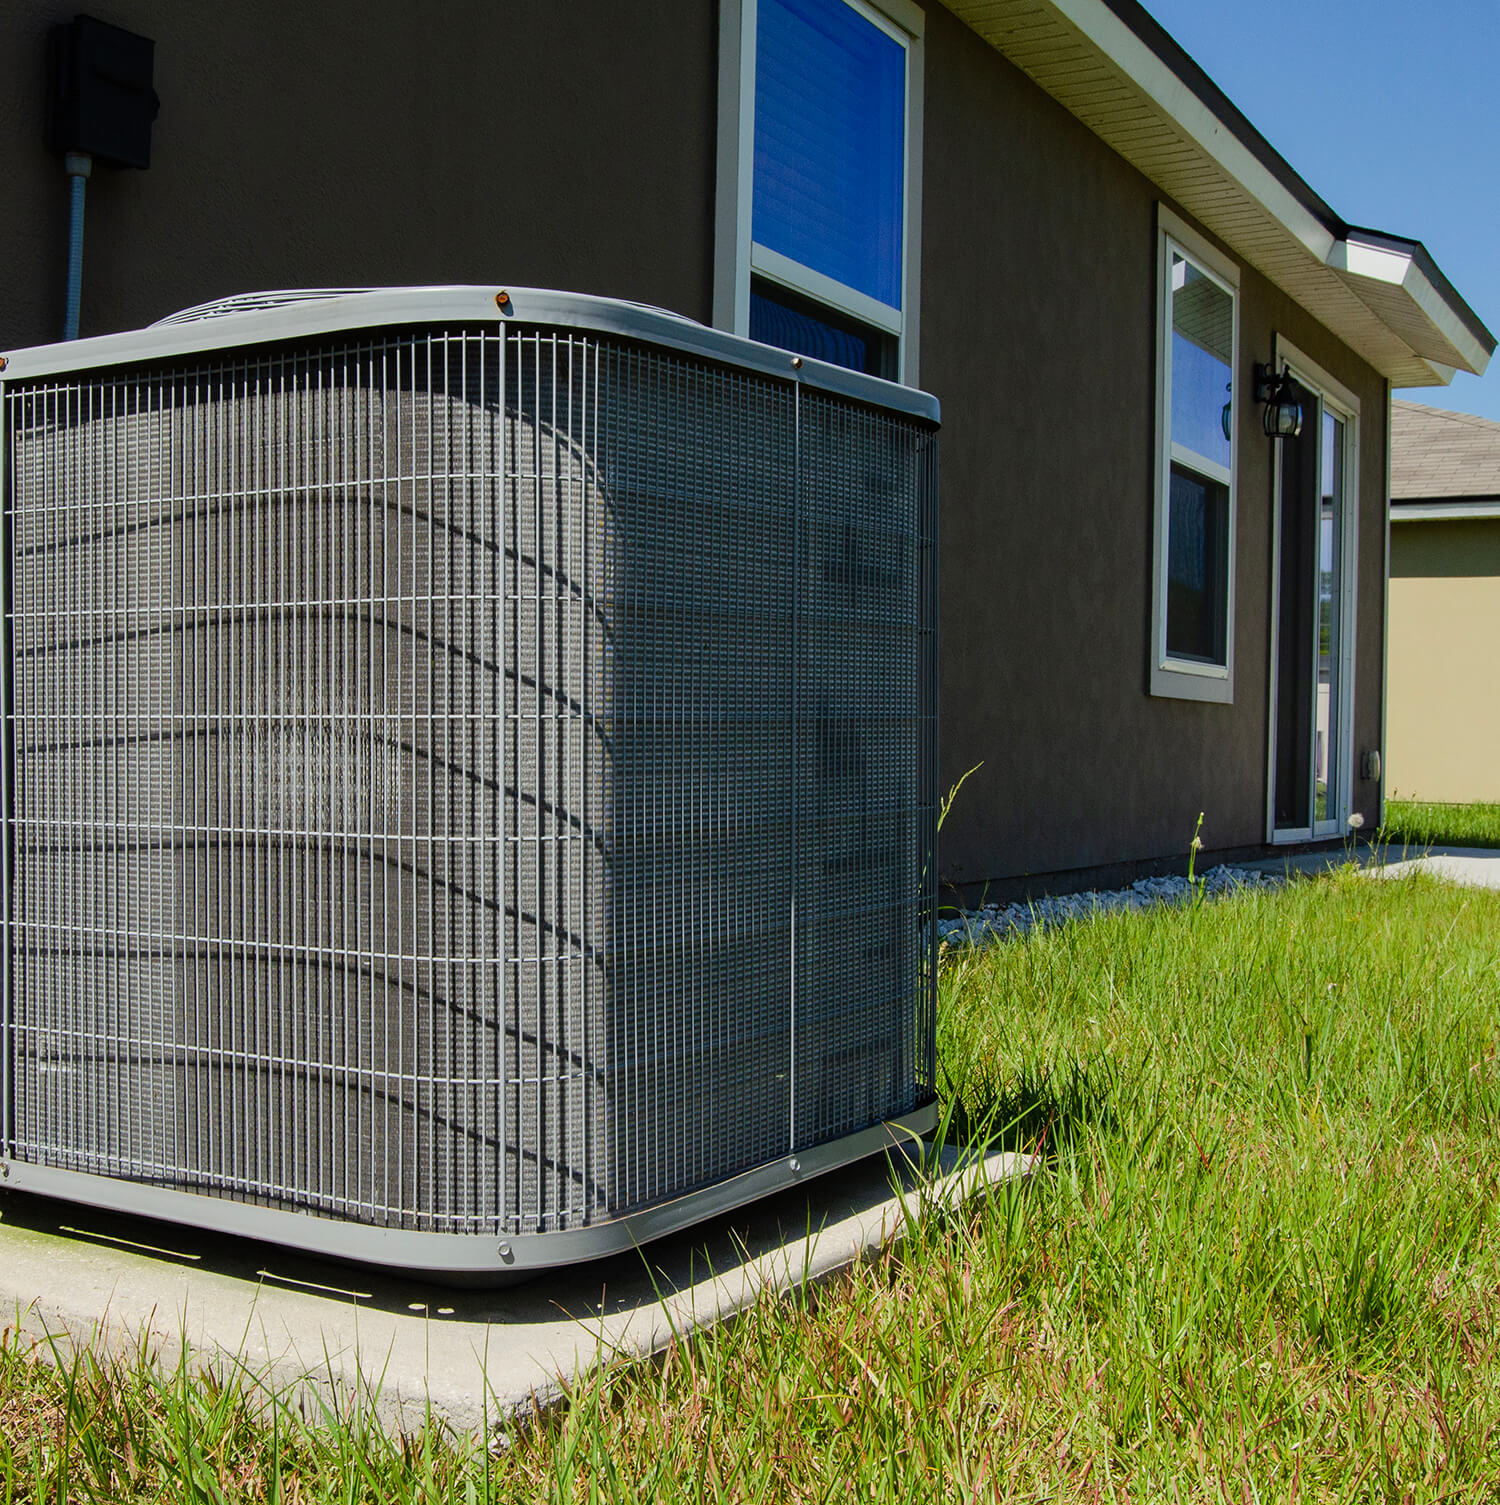 Using a heat pump to entirely switch from heating to cooling